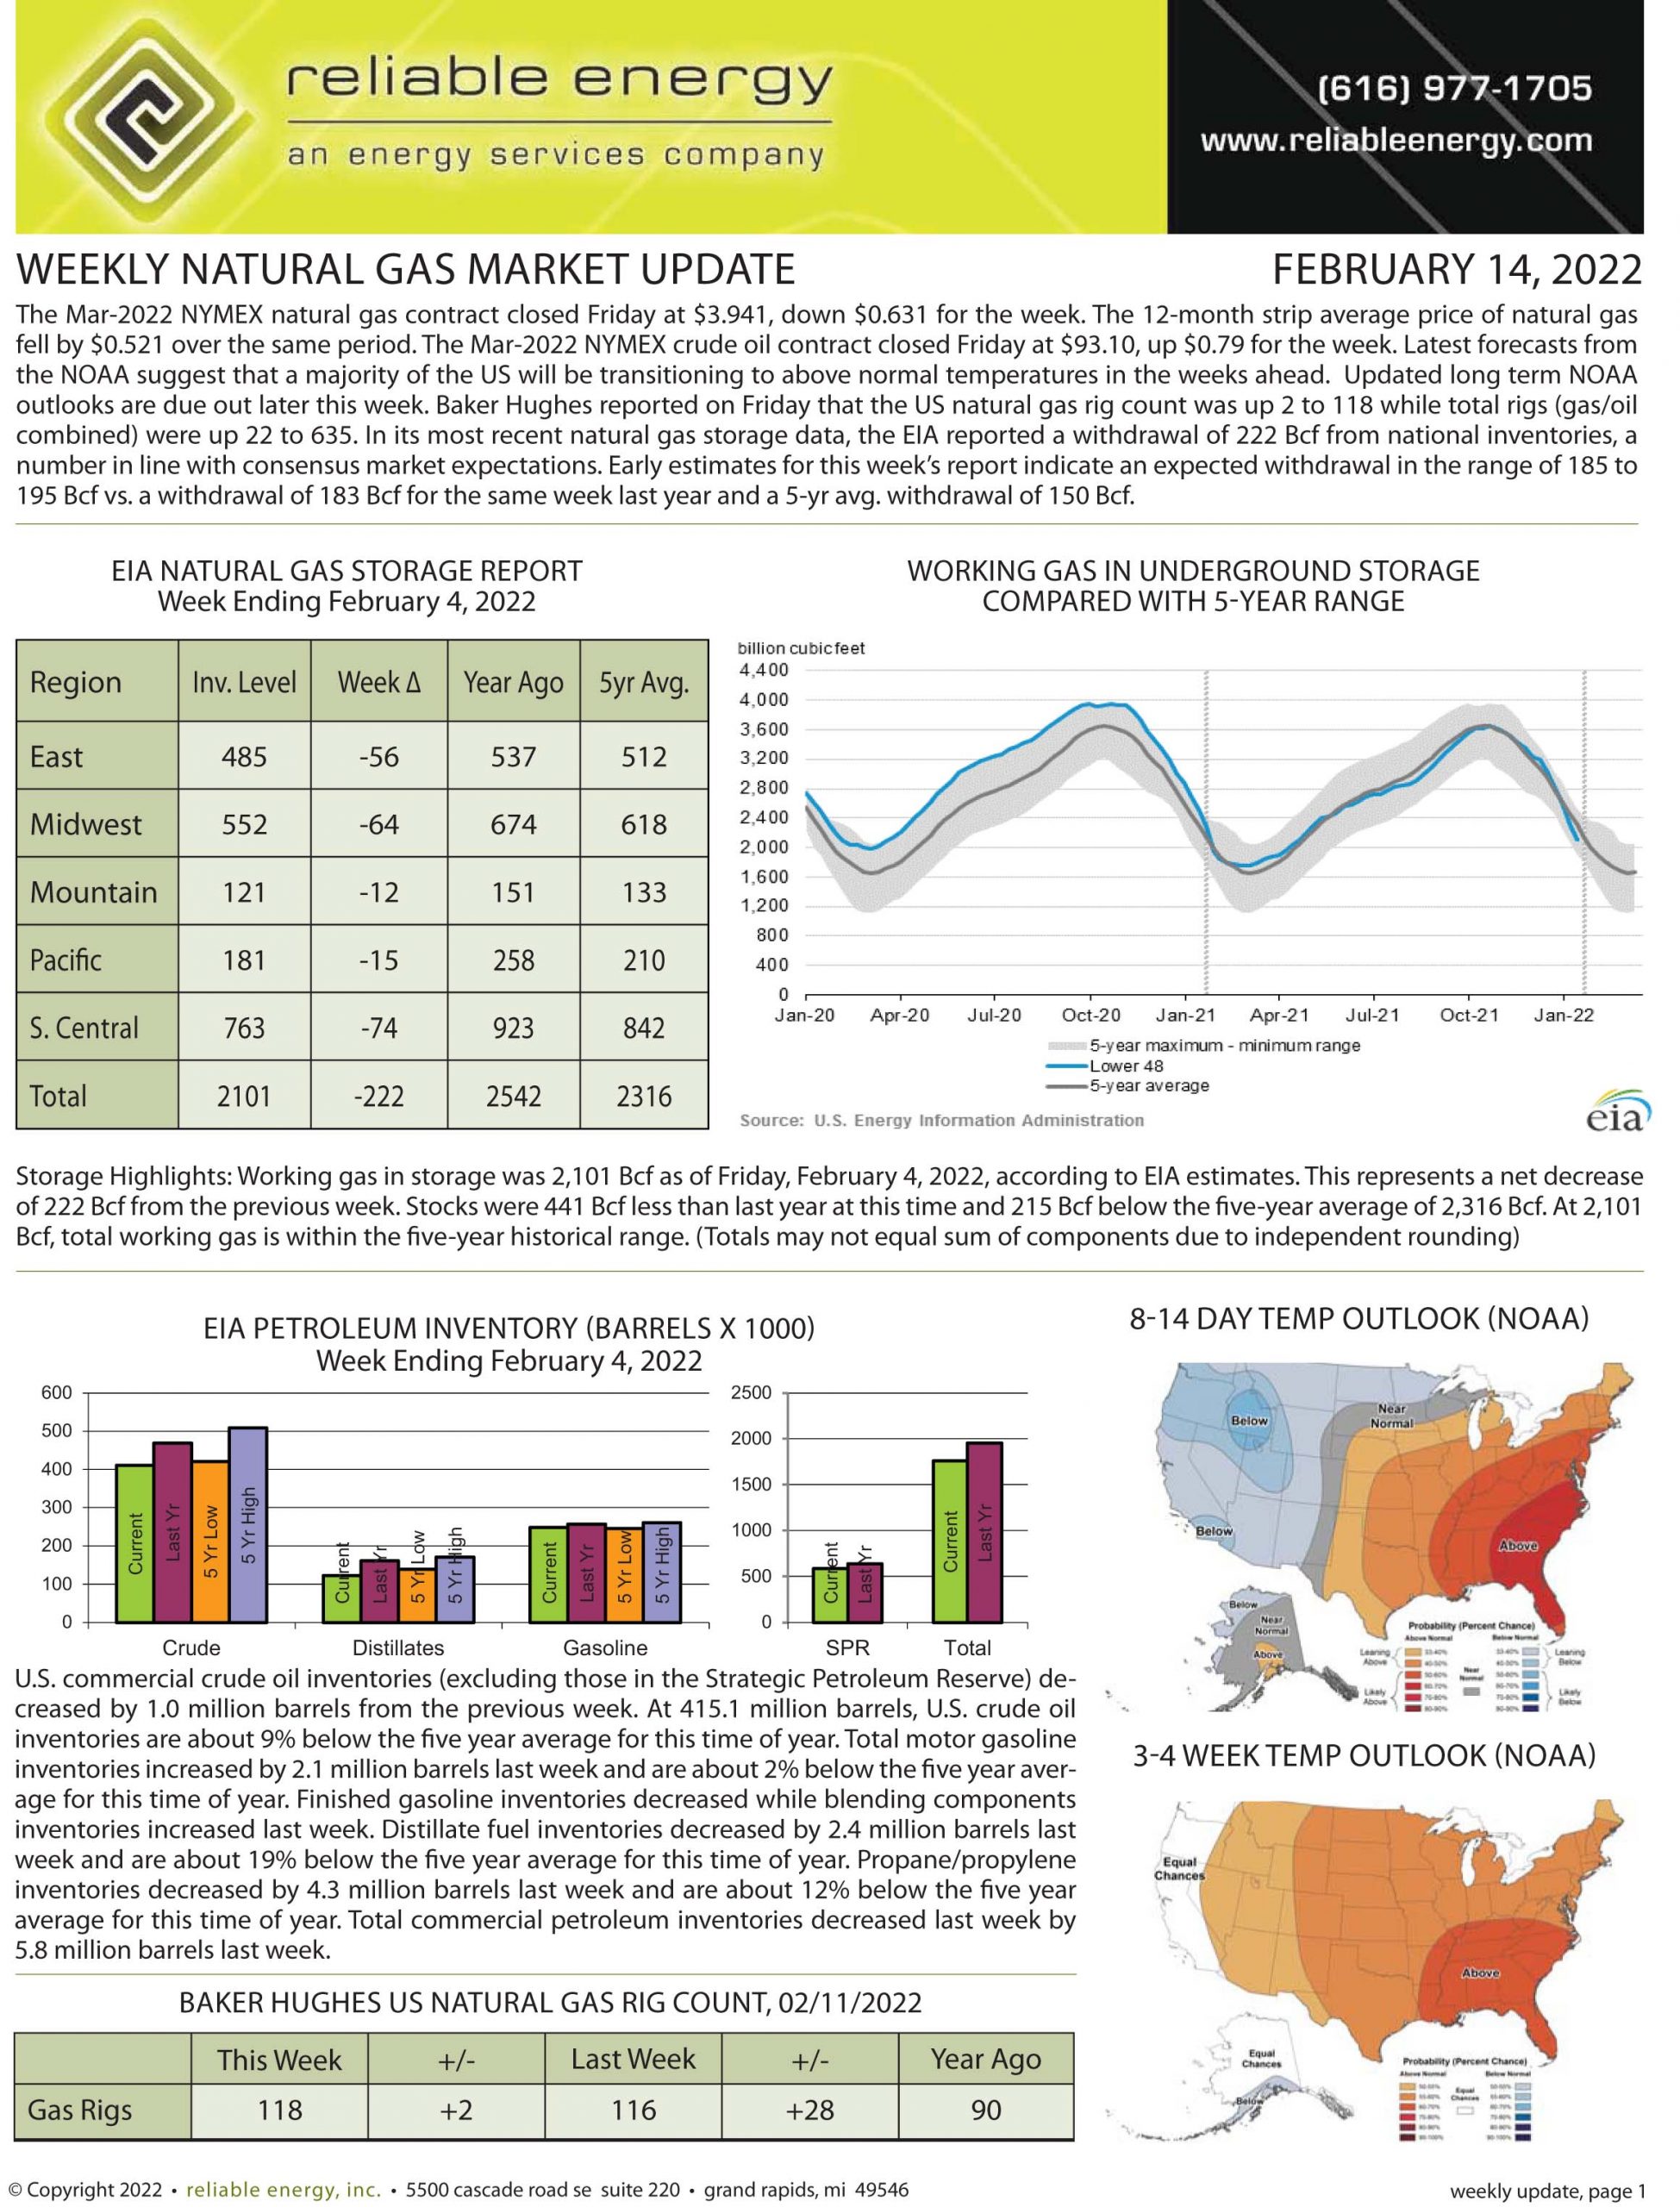 Natural Gas Market Update – February 14, 2022